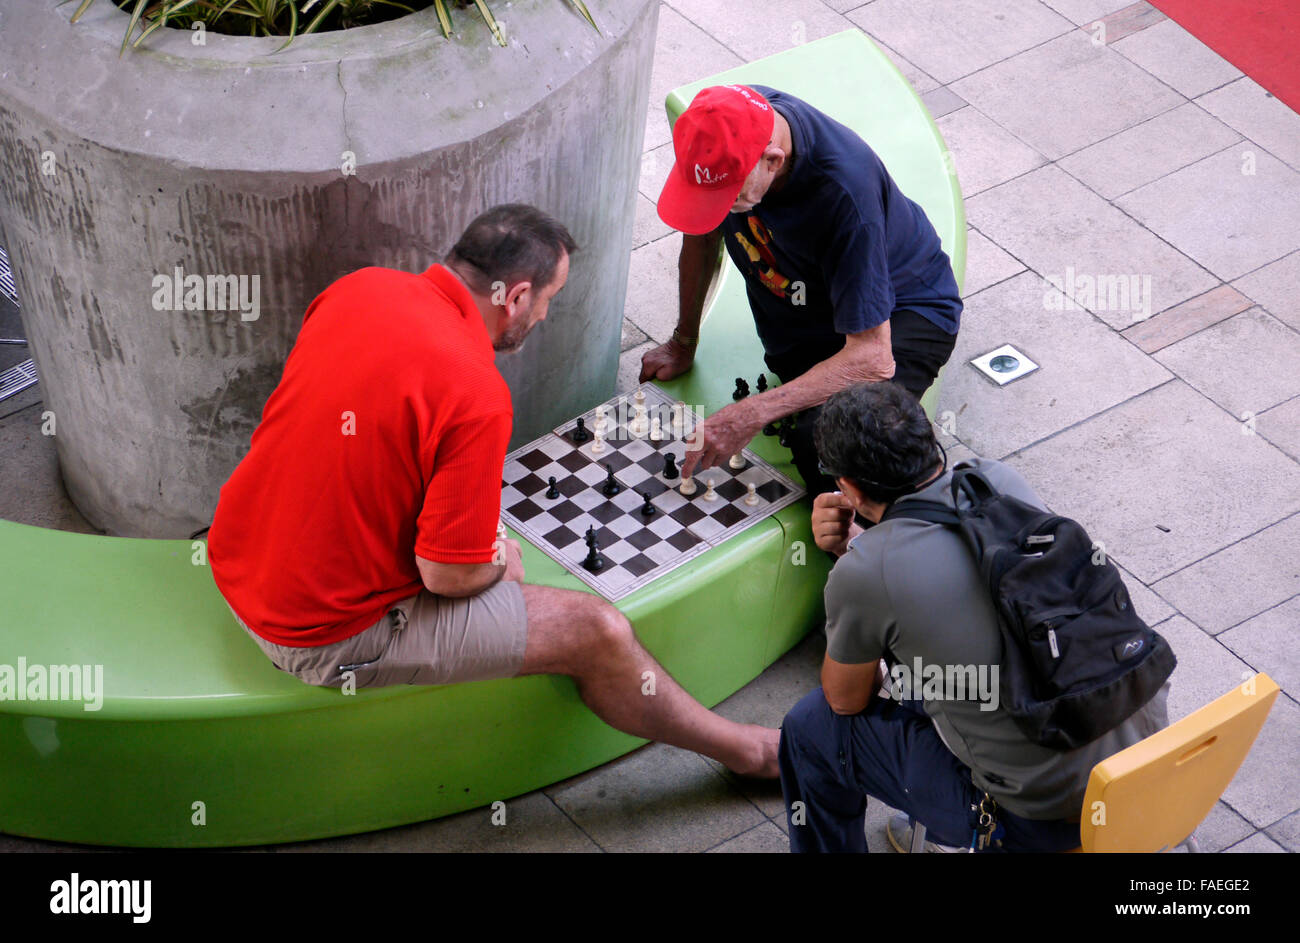 Two males having a game of chess which is being played outdoors in a public space Stock Photo